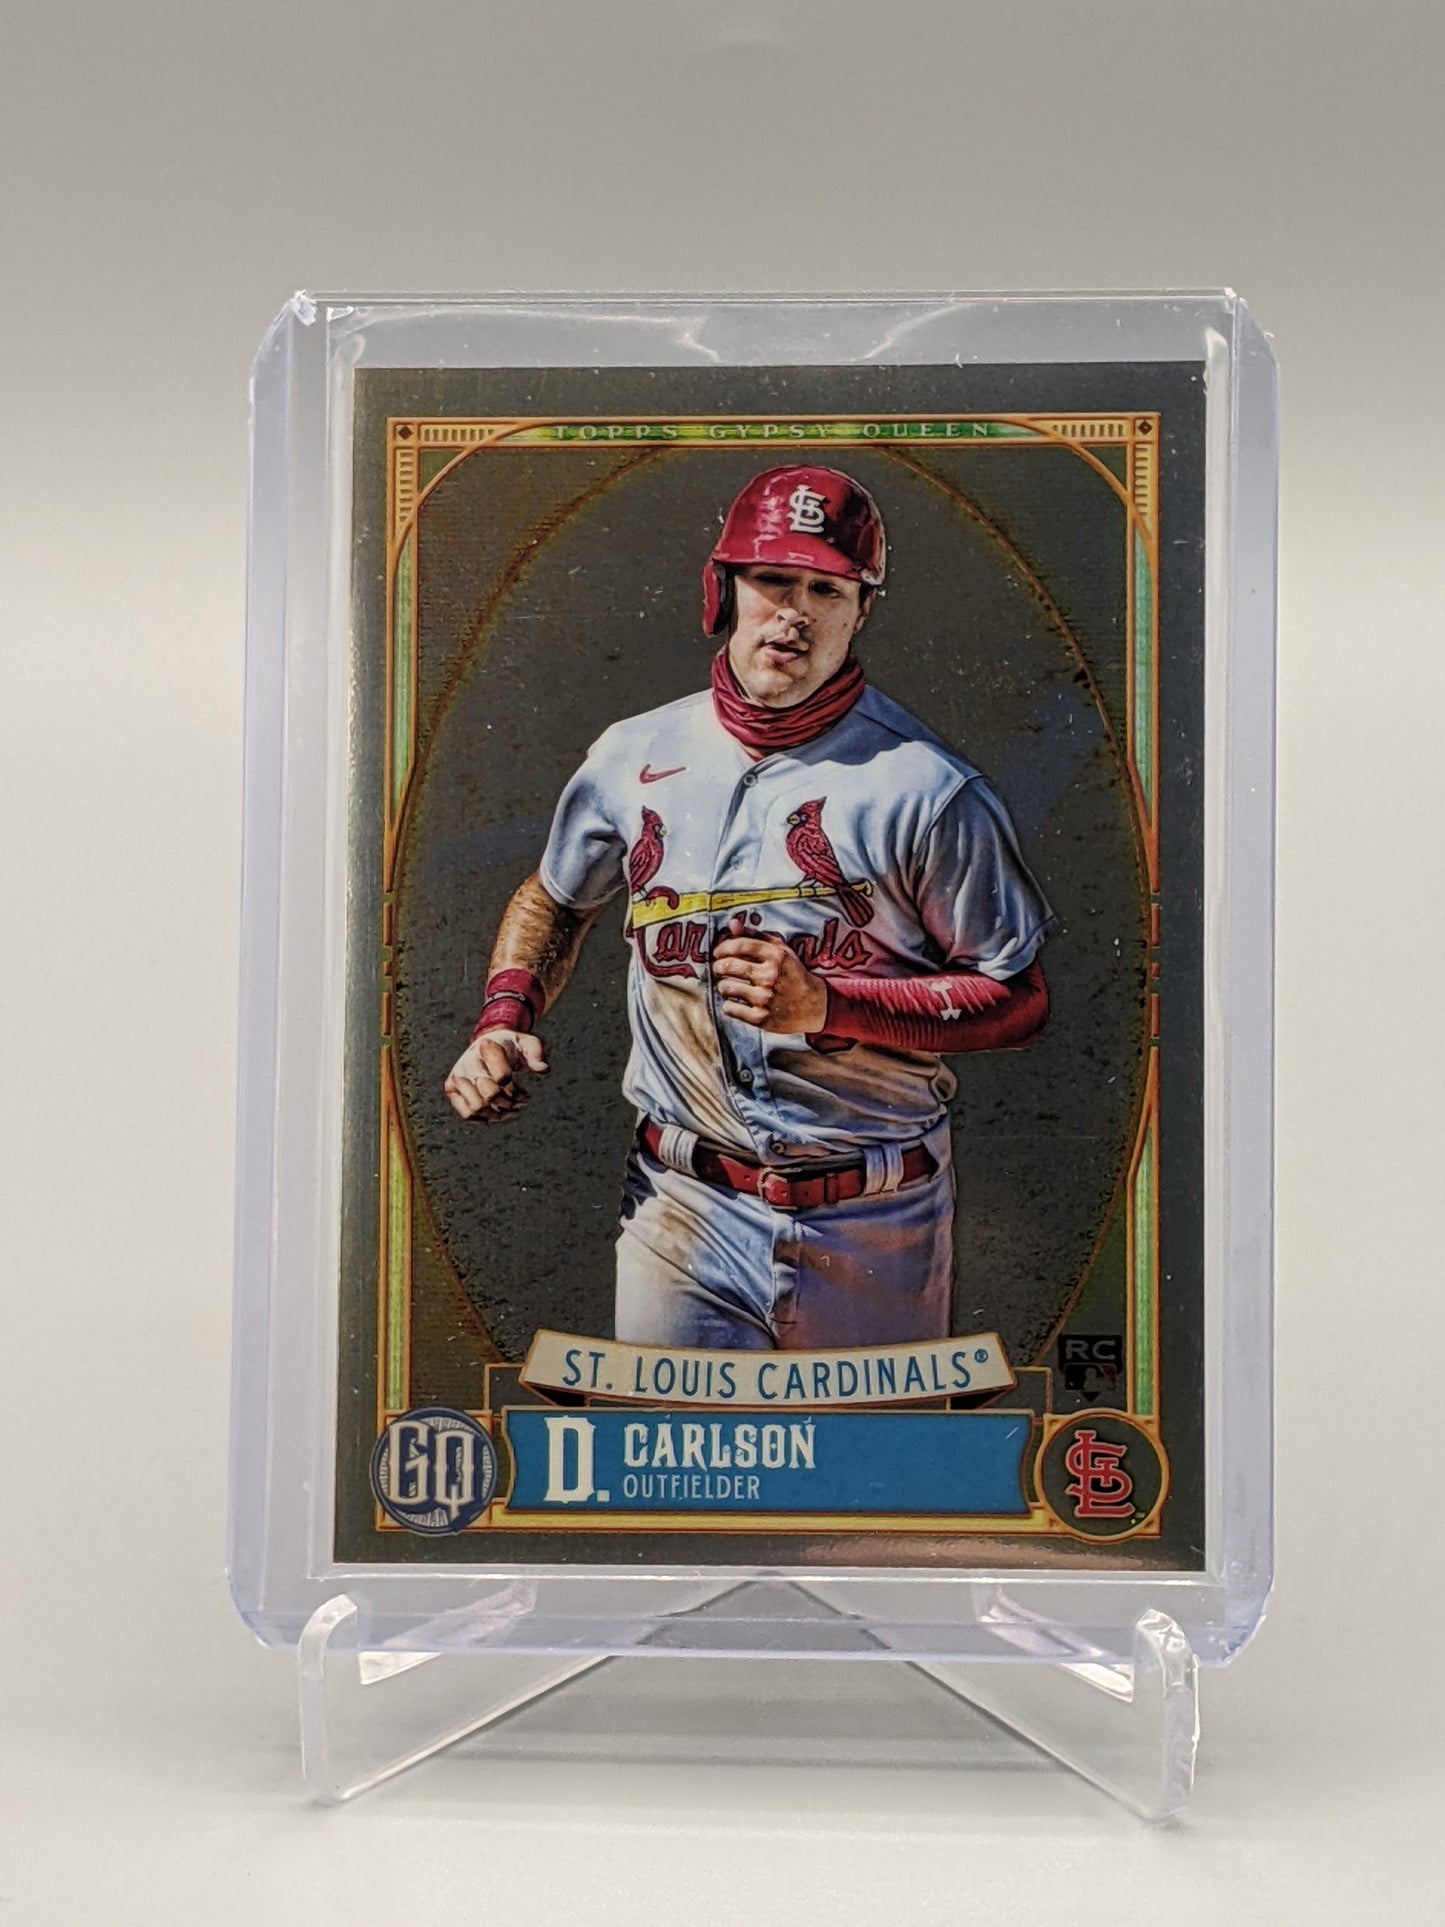 2021 Topps Gypsy Queen Chrome #85 Dylan Carson RC Cardinals